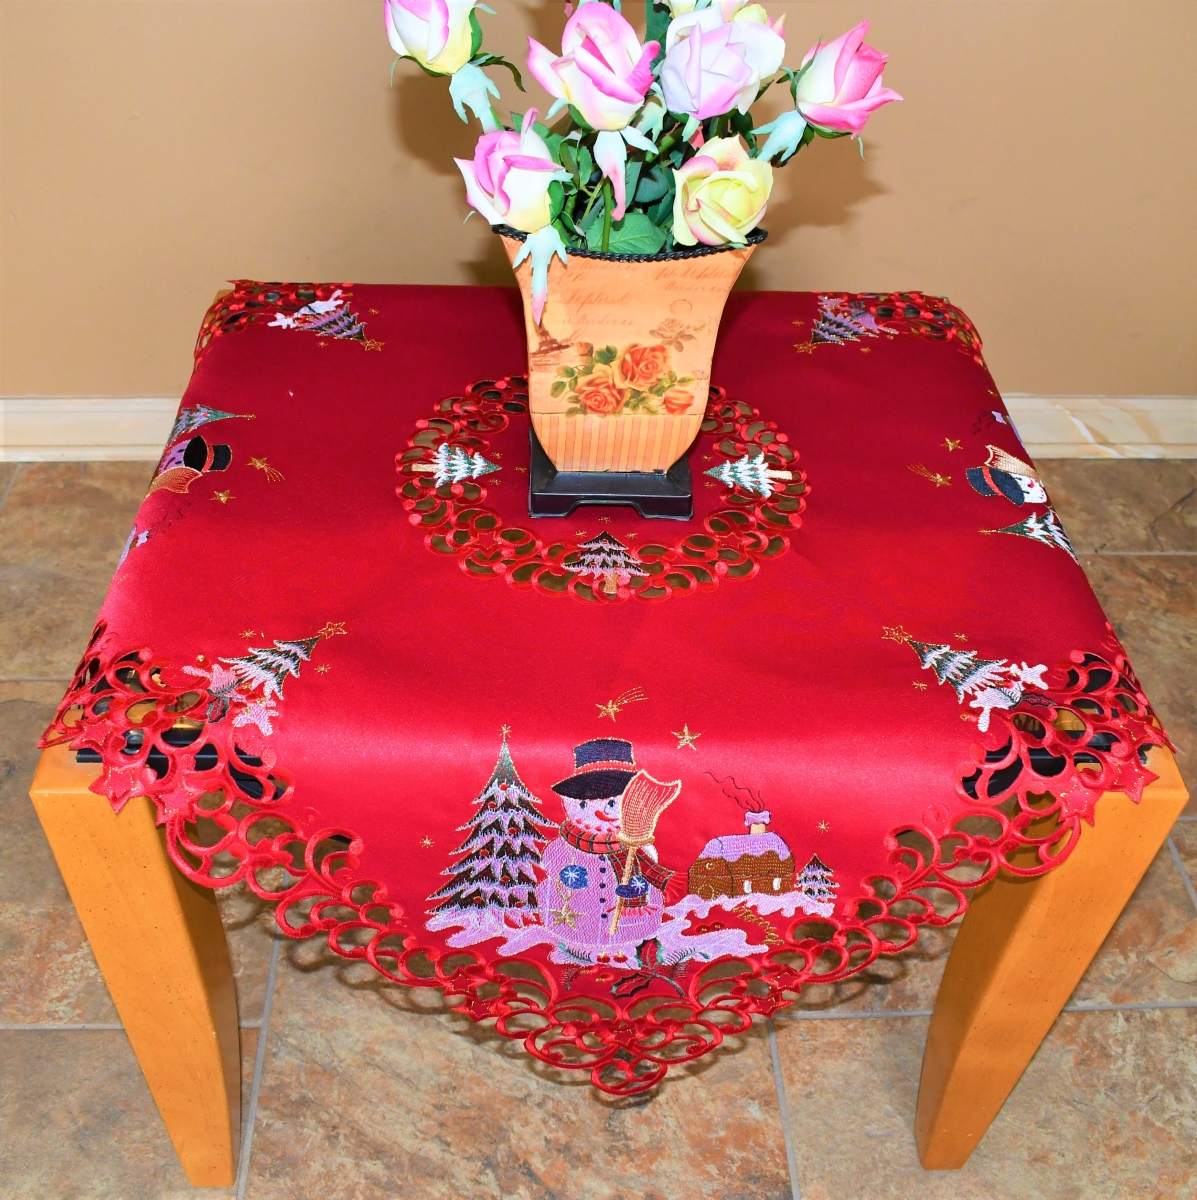 Picture of Sinobrite H8508-34x34SQ 34 x 34 in. Snowman on Red Fabric Square Table Topper